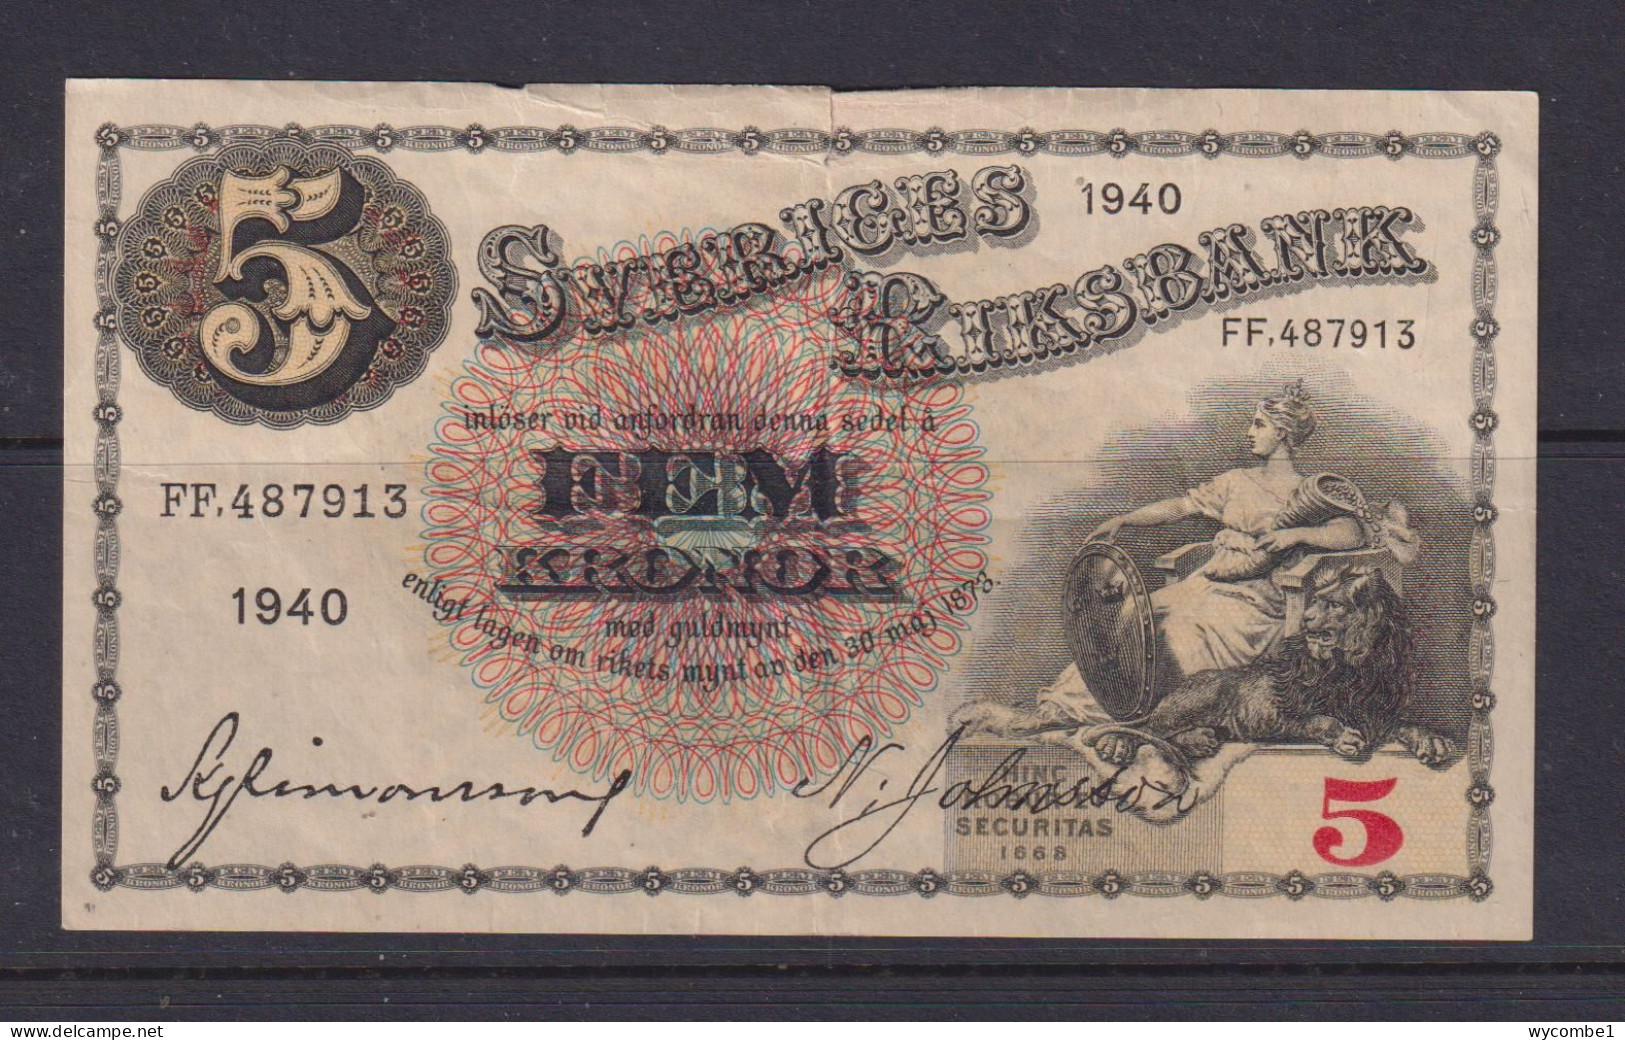 SWEDEN - 1940 5 Kronor Circulated Banknote As Scans - Sweden